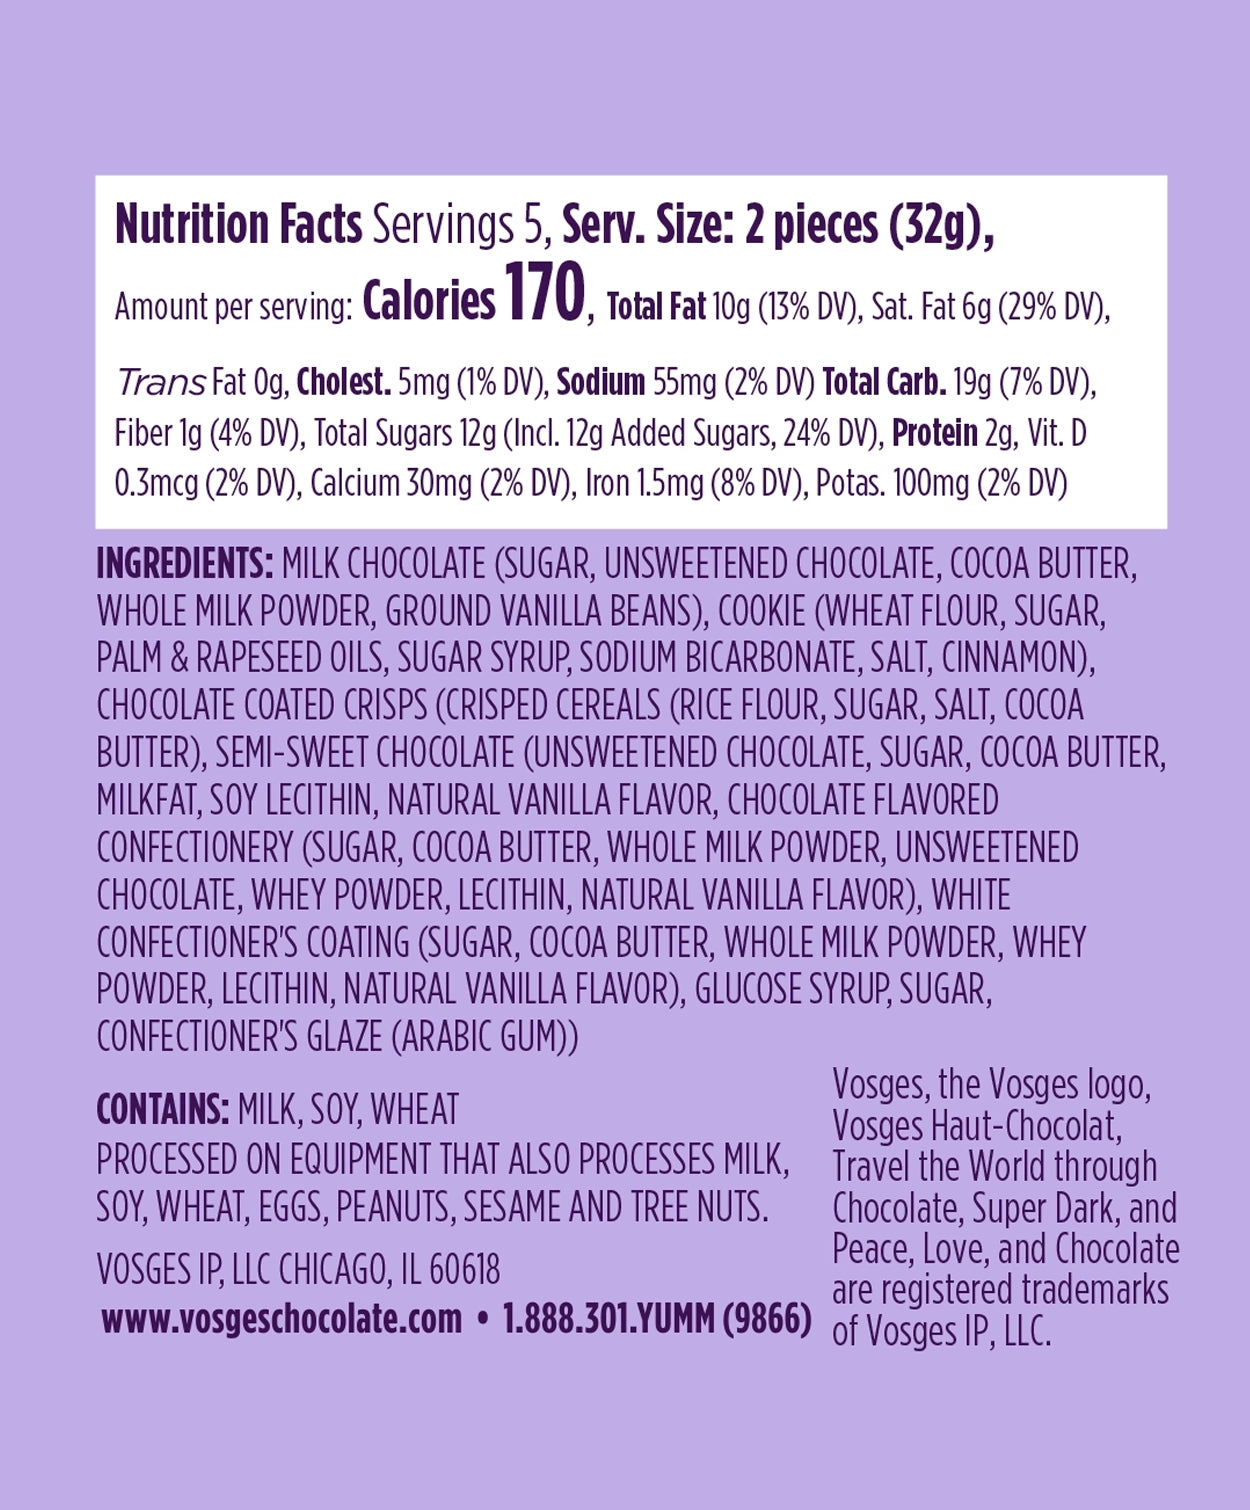 Nutrition Facts and Ingredients of Vosges Haut-Chocolat Chocolate Dipped Belgian Speculoos Cookies in purple, san-serif font on a light purple background.